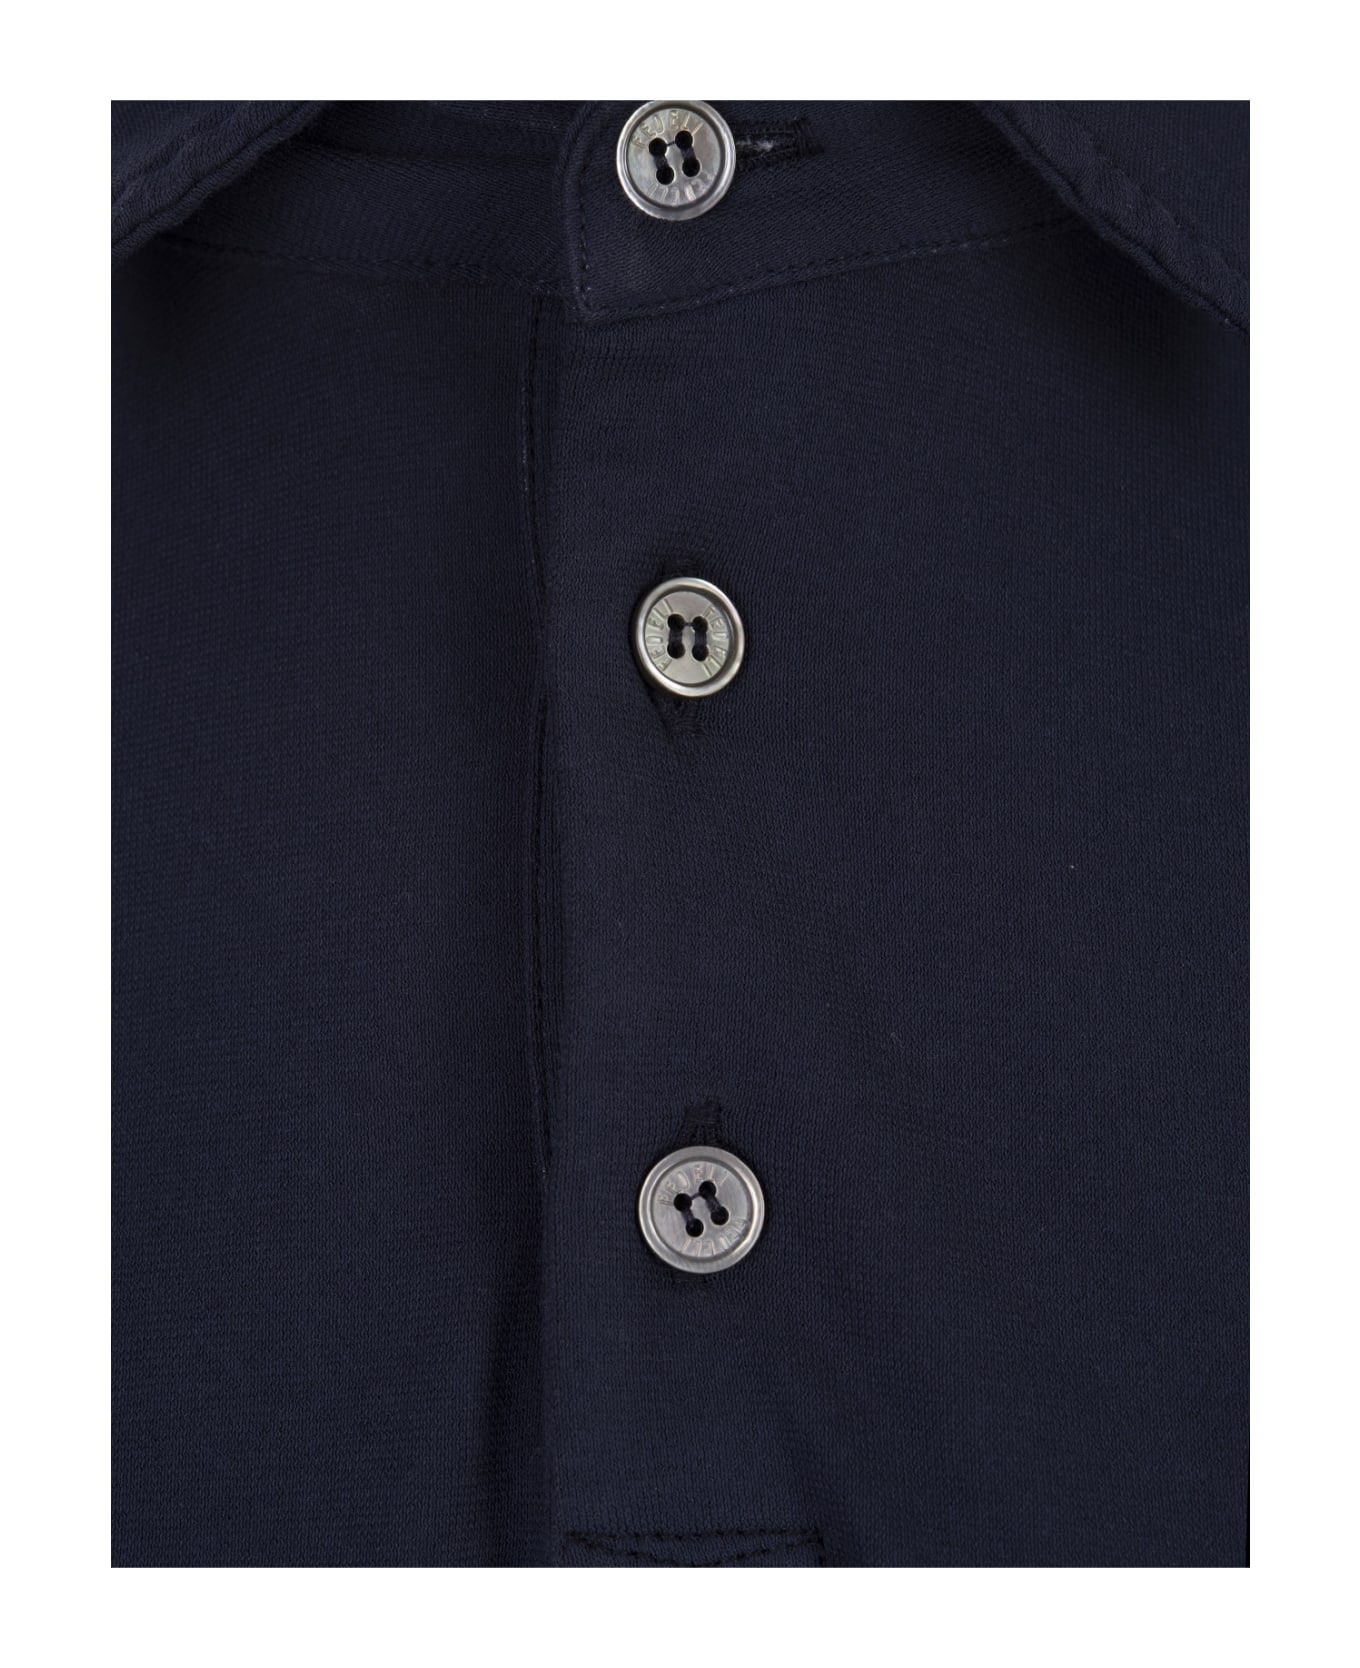 Fedeli Short-sleeved Polo Shirt In Navy Blue Cotton - Blue